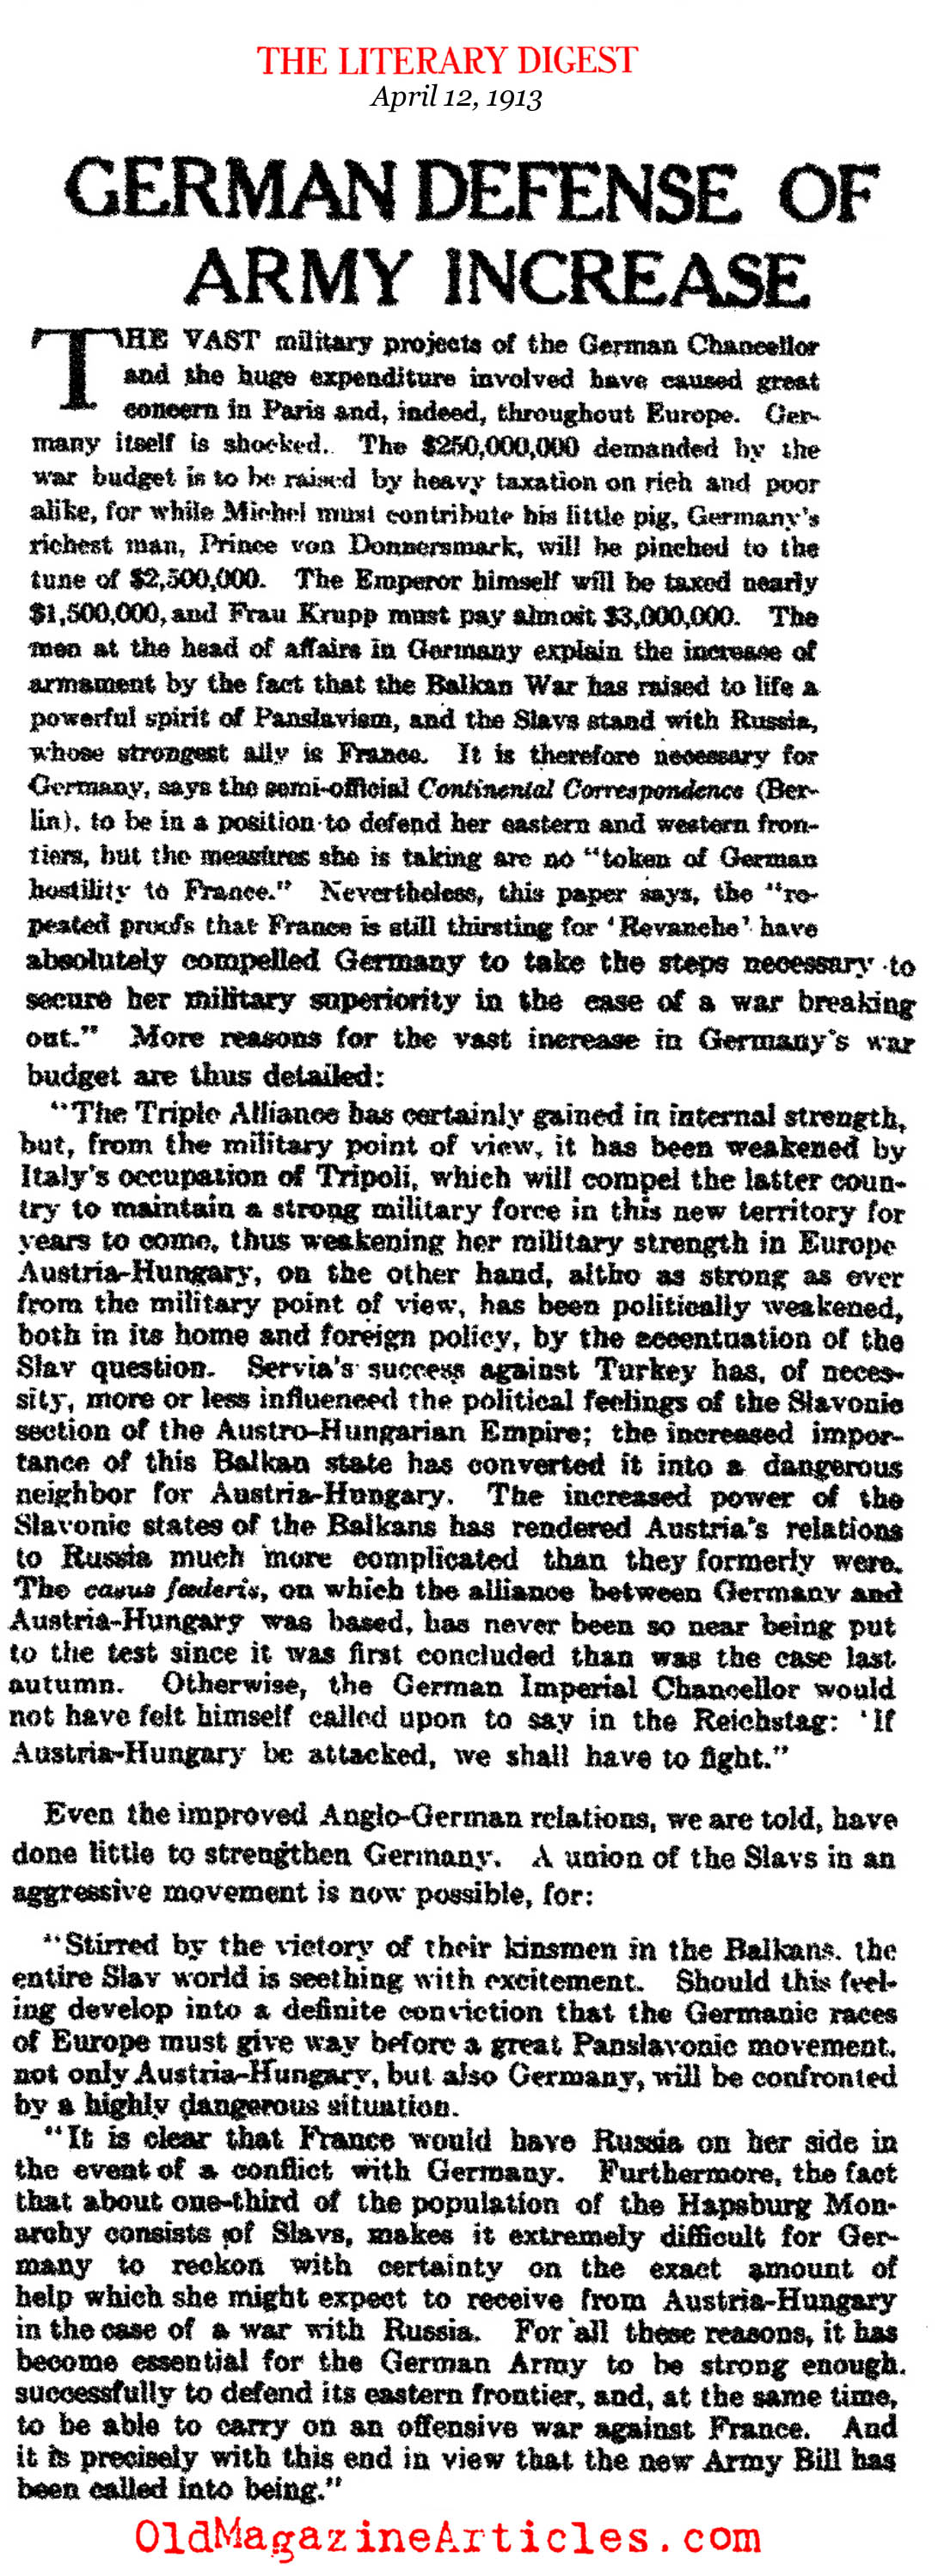 Germany Defends It's Military Build Up  (Literary Digest, 1913)